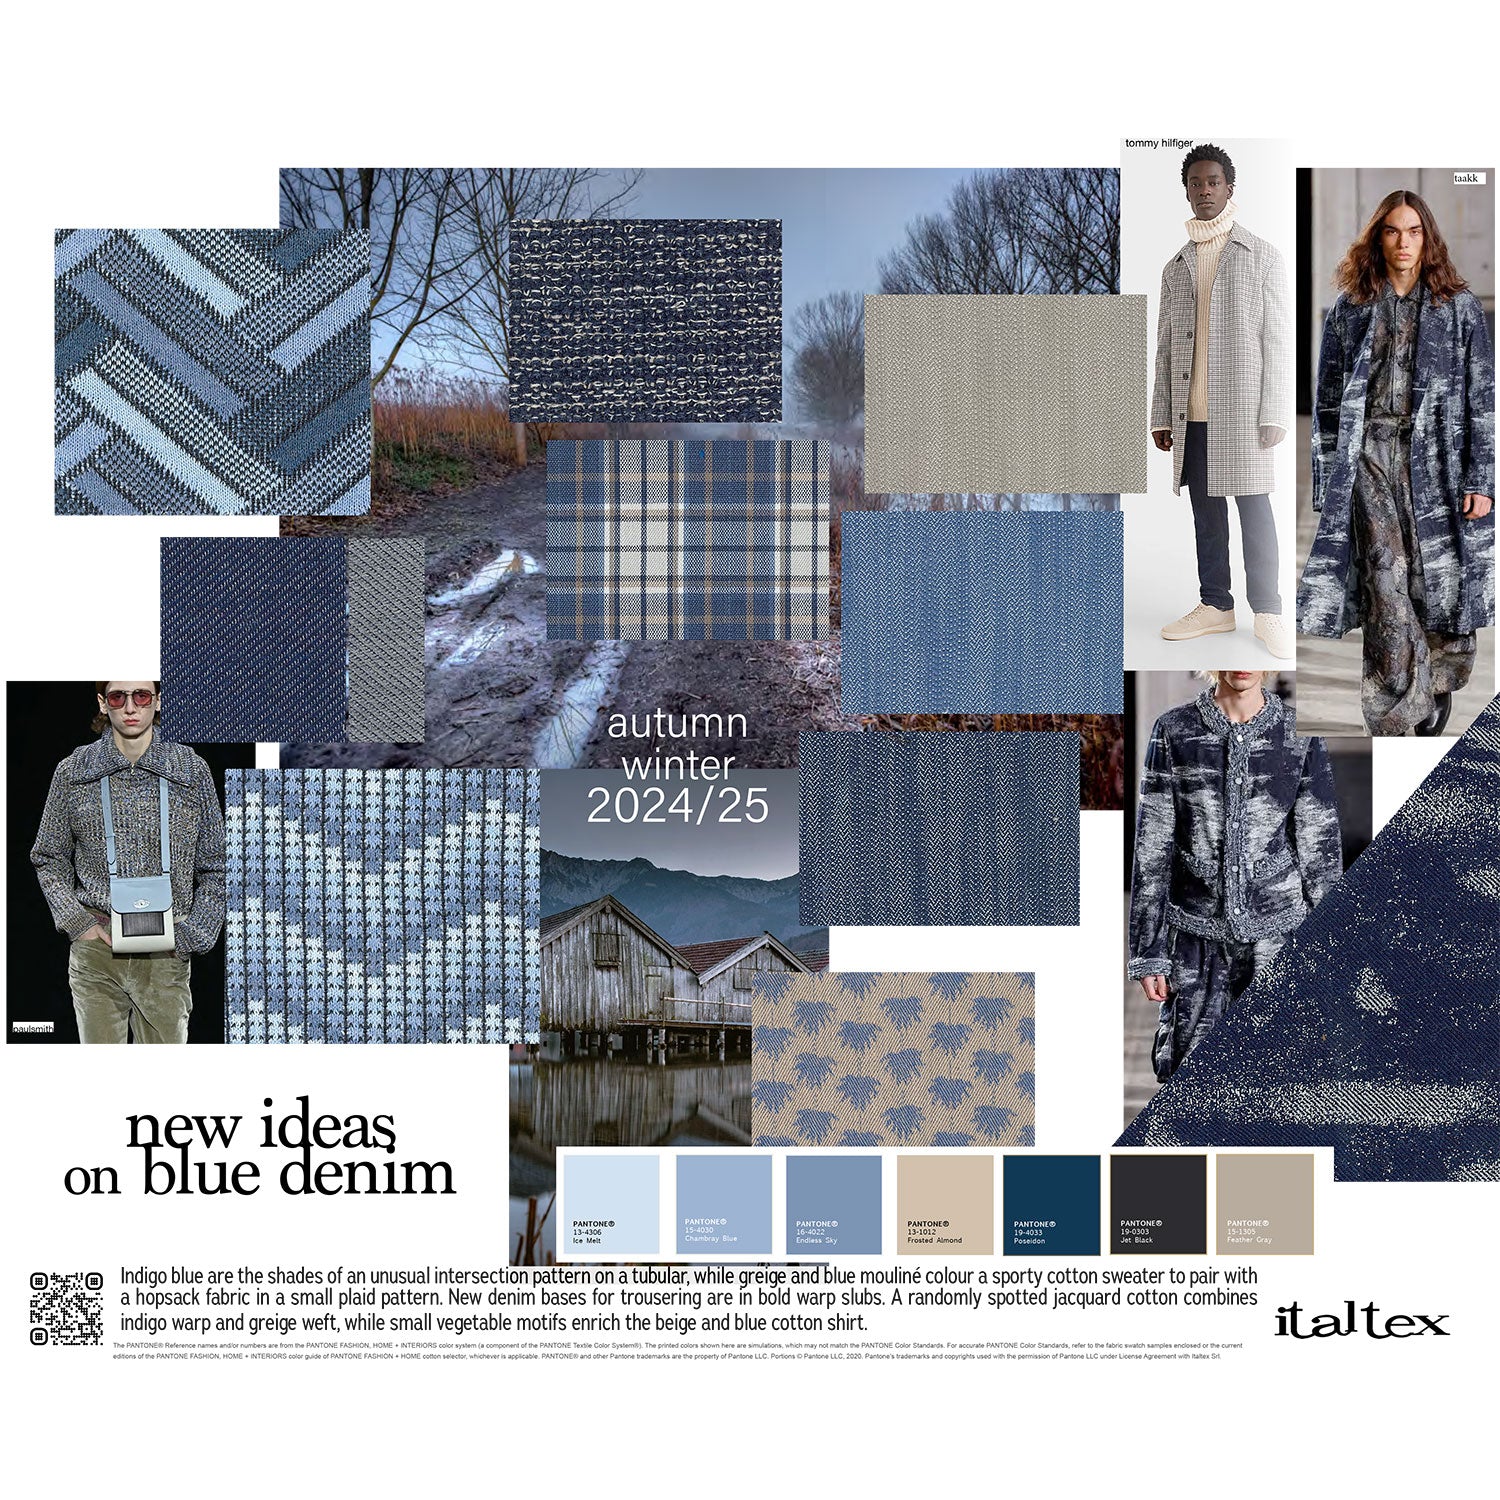 Nine fabric swatches for menswear denim. A herringbone effect tubular jersey. A white and light blue herringbone knit in unusual stitches. a double-face knit blue denim. Three uneven denim fabrics in greyish, bright and dark blue. One jacquard pattern knit. Printed blue leaves on a grey ground. A black, white and blue plaid check. A horizontal effect white and blue knit